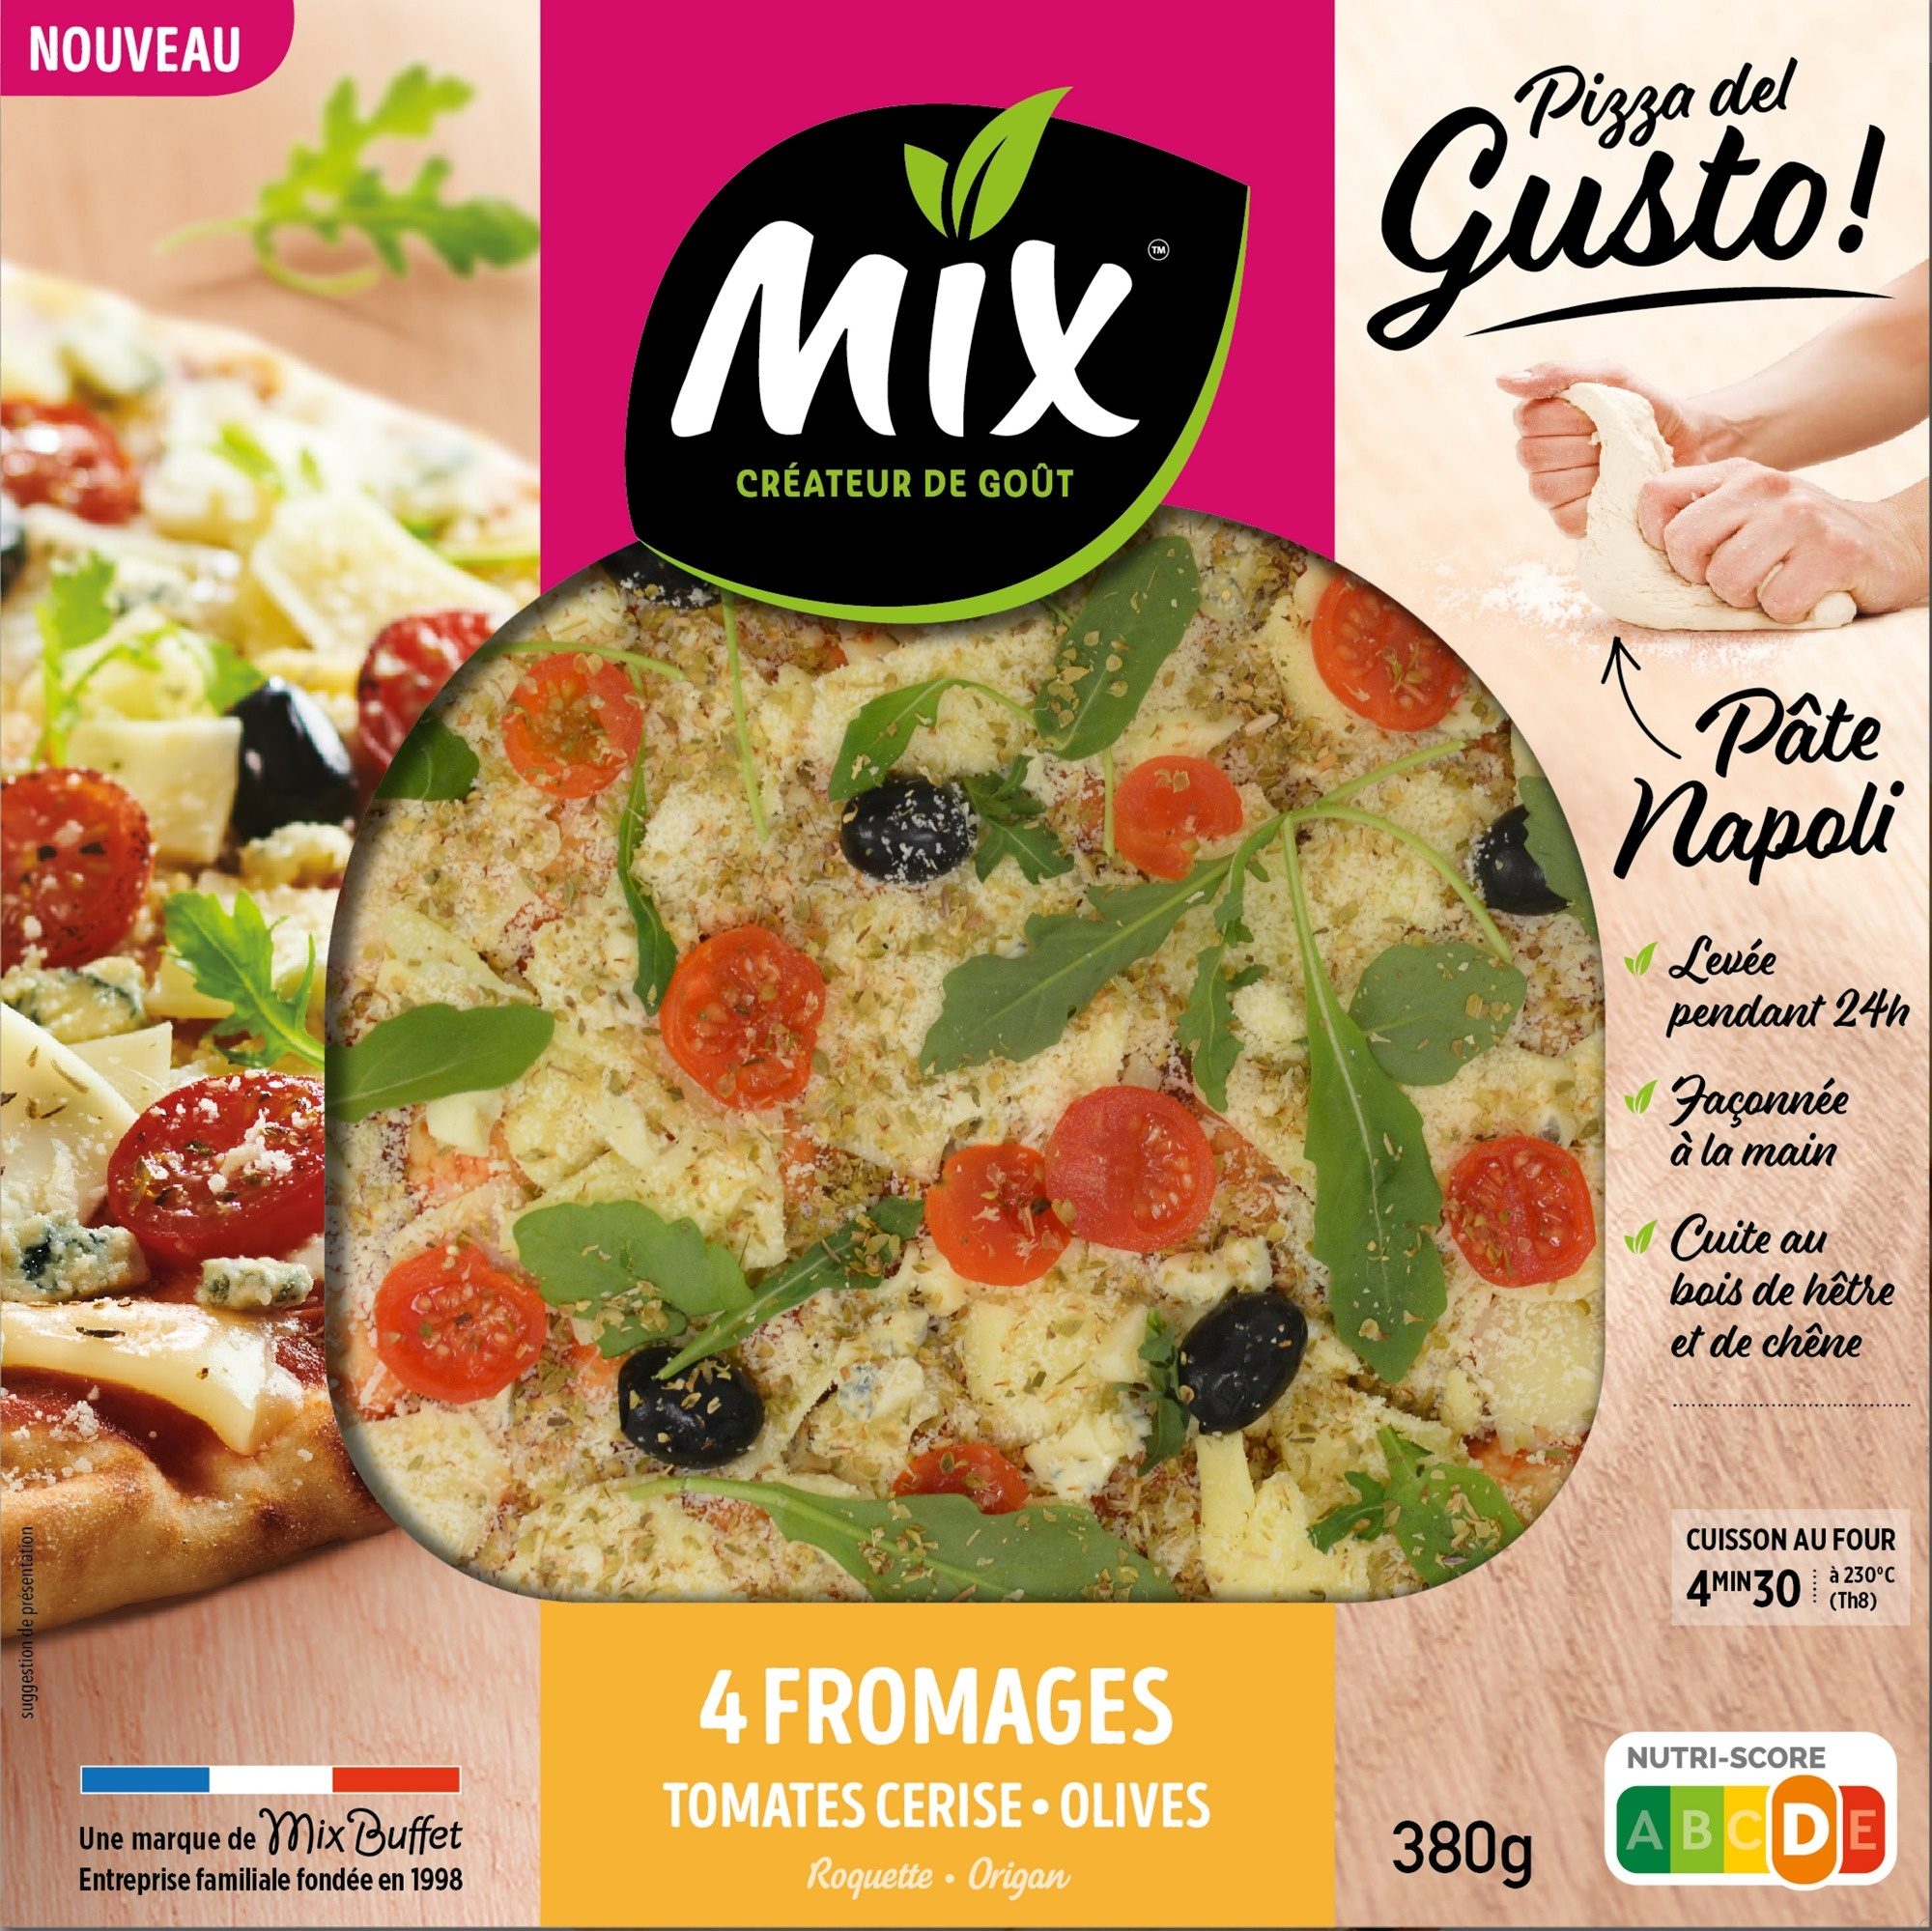 Pizza del Gusto ! 4 Fromages